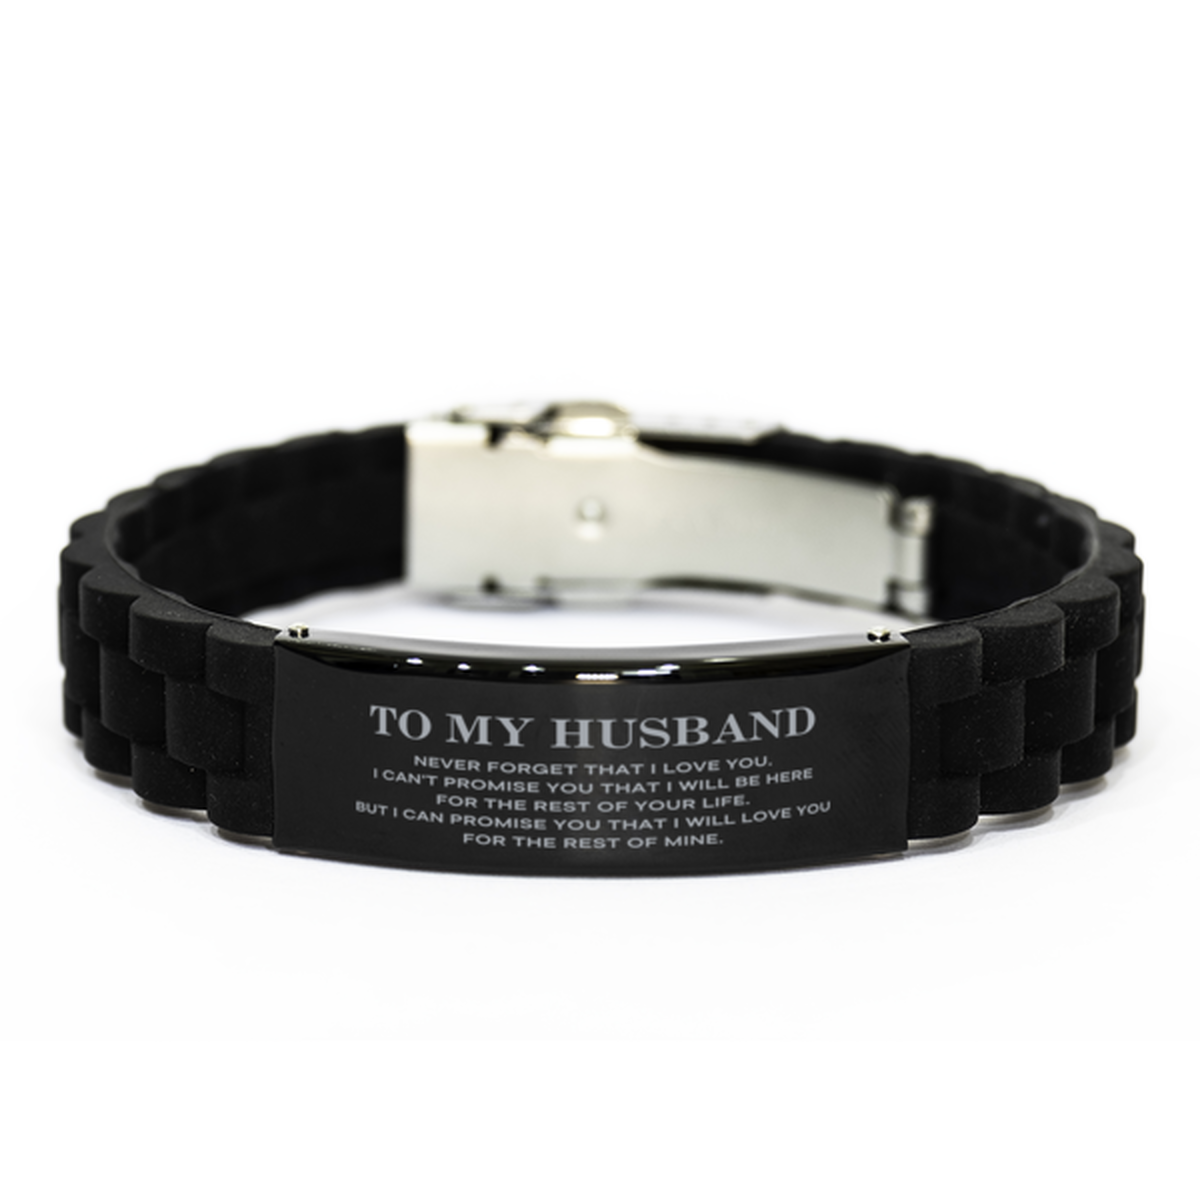 To My Husband Gifts, I will love you for the rest of mine, Love Husband Bracelet, Birthday Christmas Unique Black Glidelock Clasp Bracelet For Husband